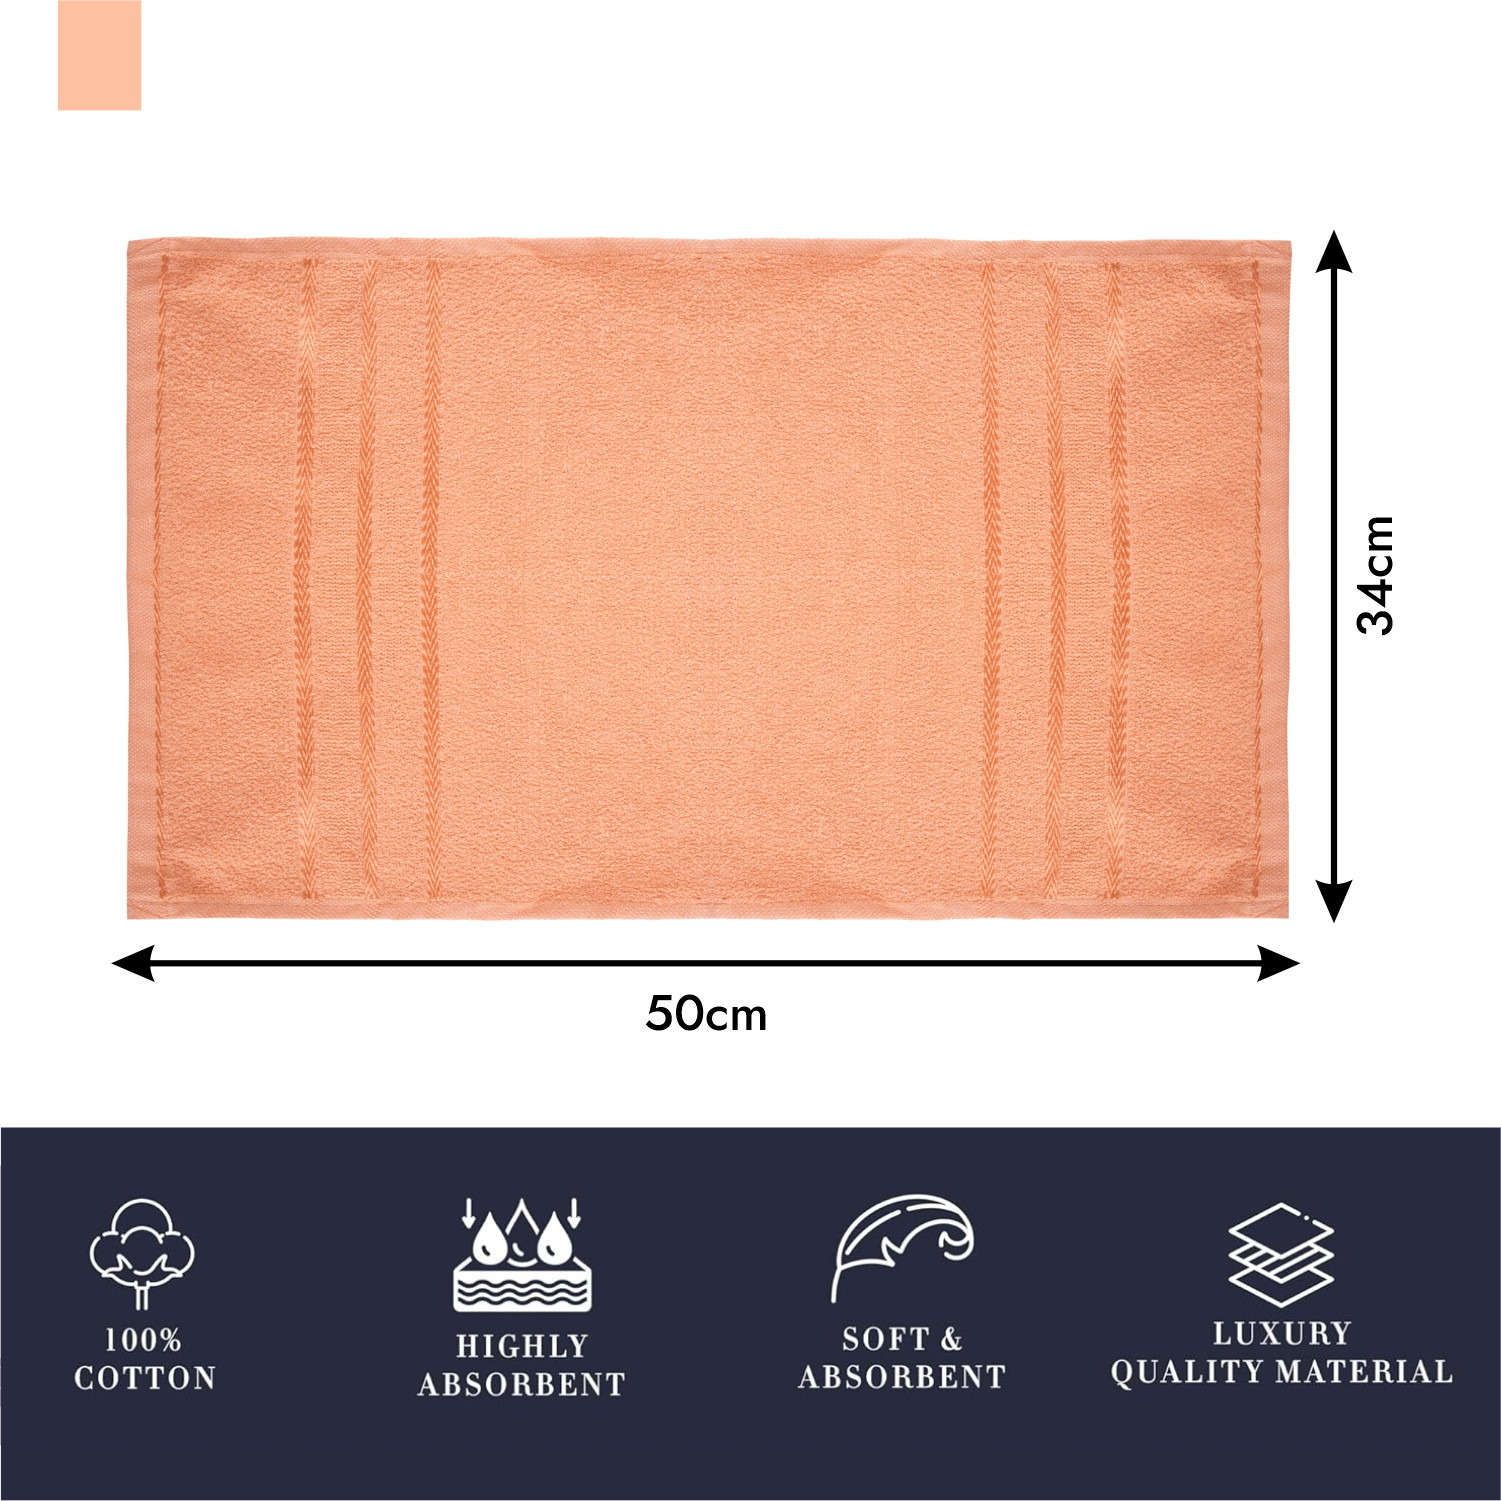 Kuber Industries Face Towel | Towels for Facewash | Towels for Gym | Facewash for Travel | Towels for Daily use | Workout Hand Towel | Lining Design | 14x21 Inch |Peach